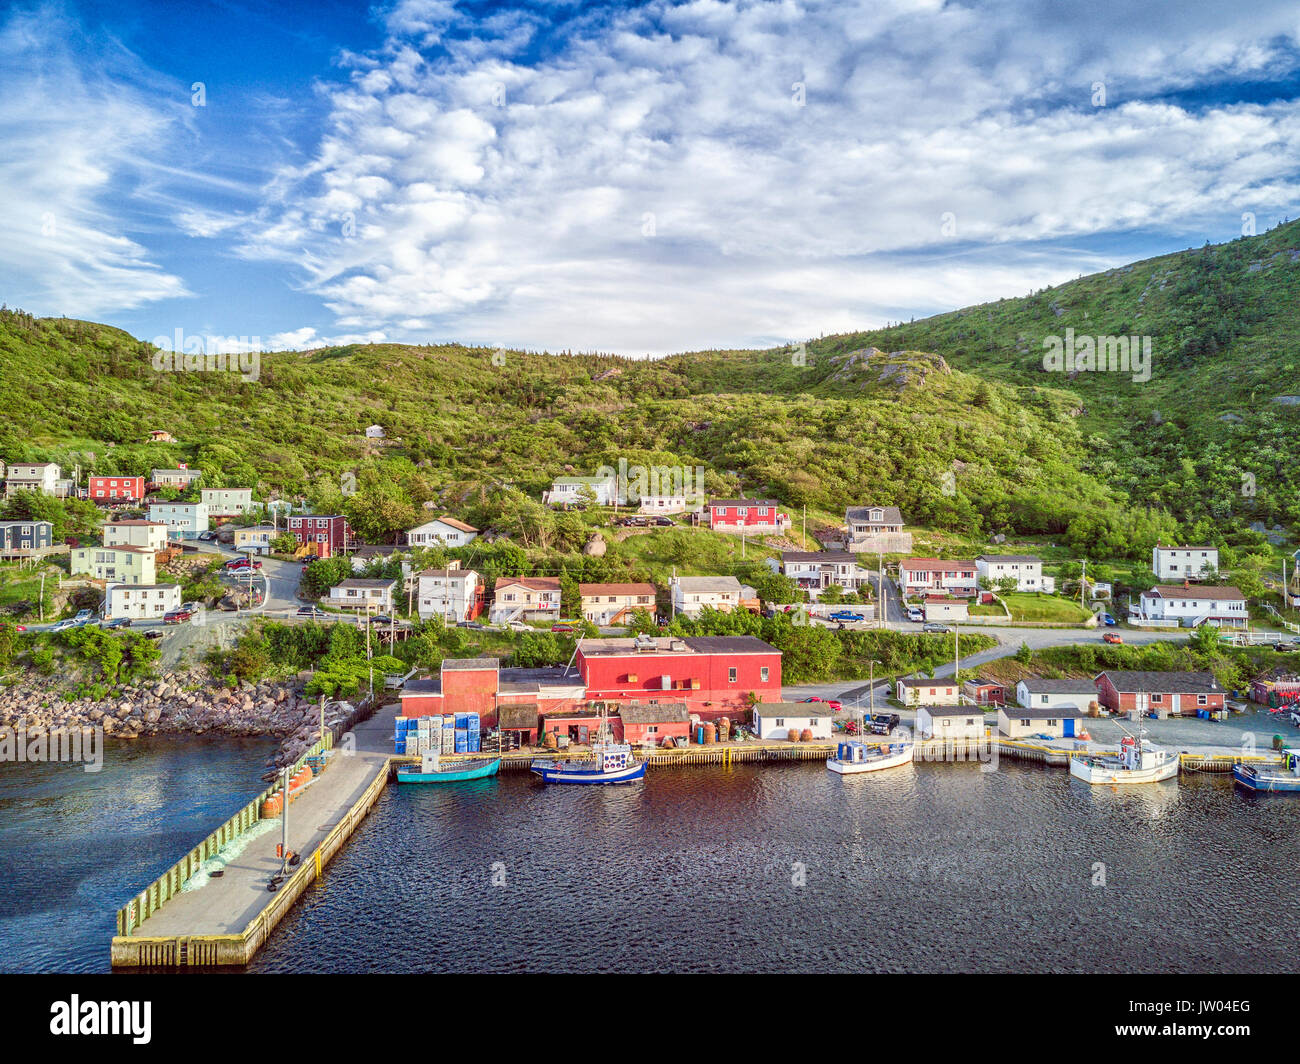 Beutiful Petty Harbour with two piers during summer sunset, Newfoundland and Labrador, Canada Stock Photo